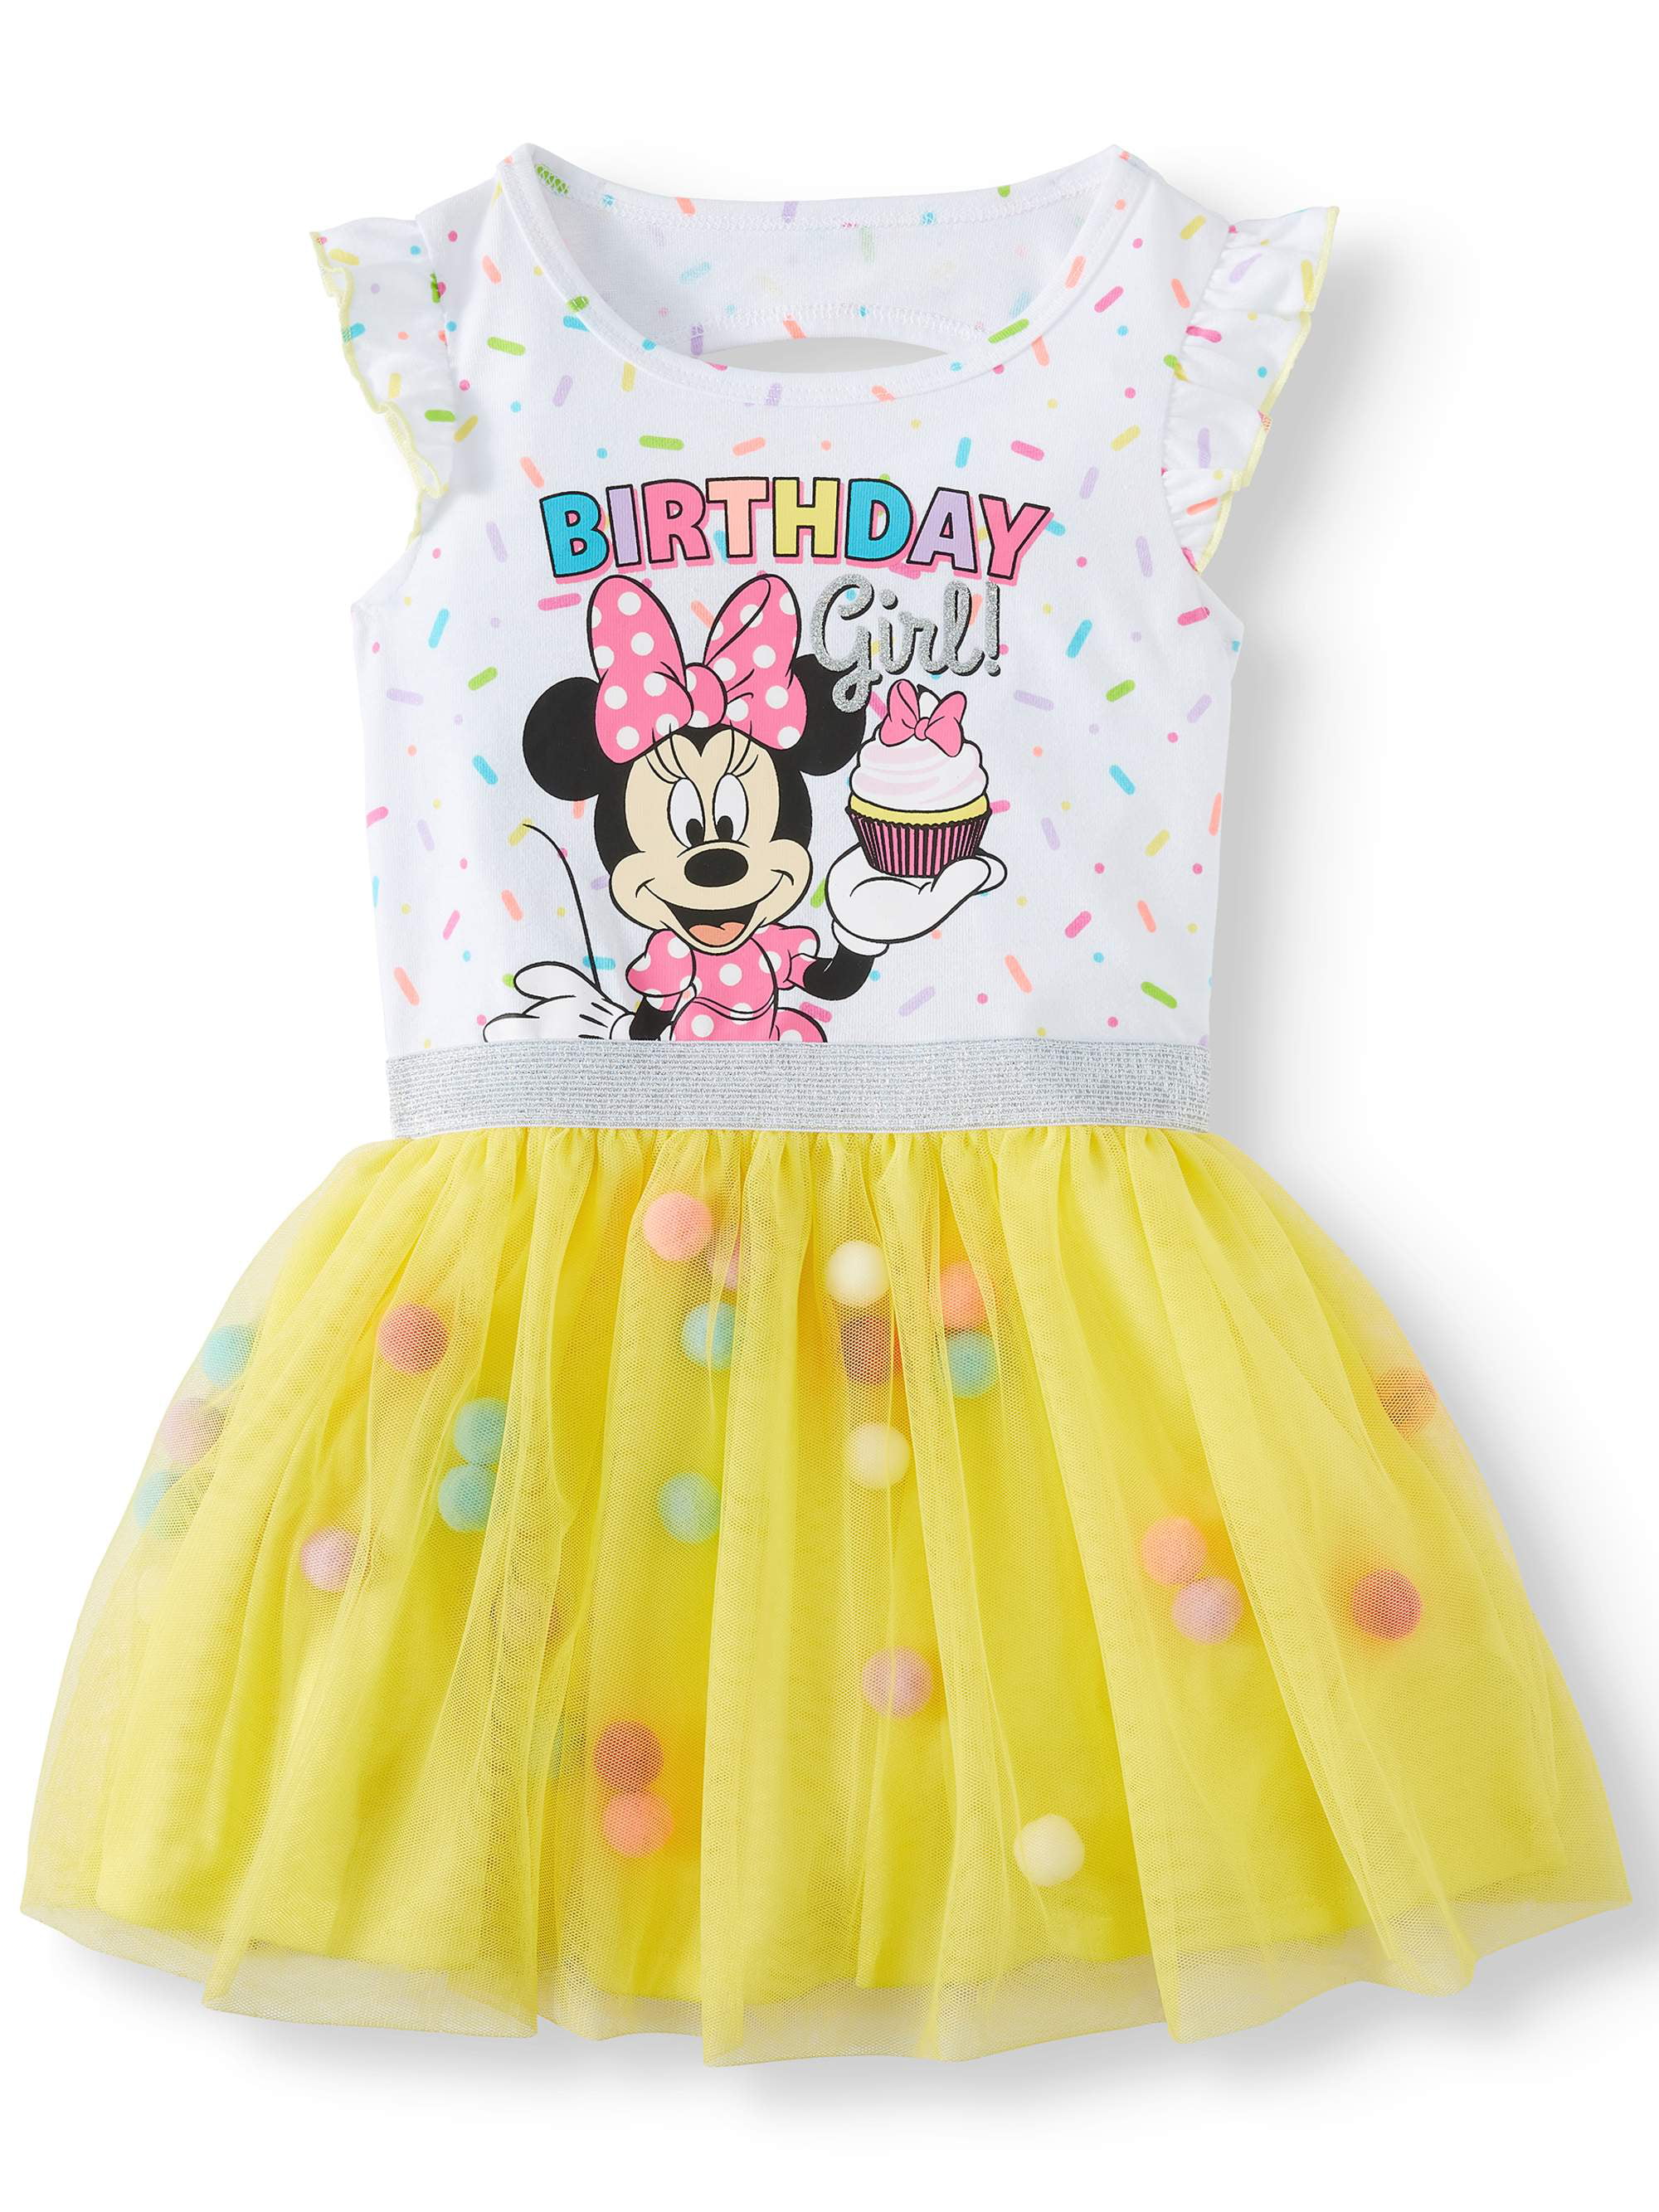 Buy > minnie mouse outfits for toddlers > in stock